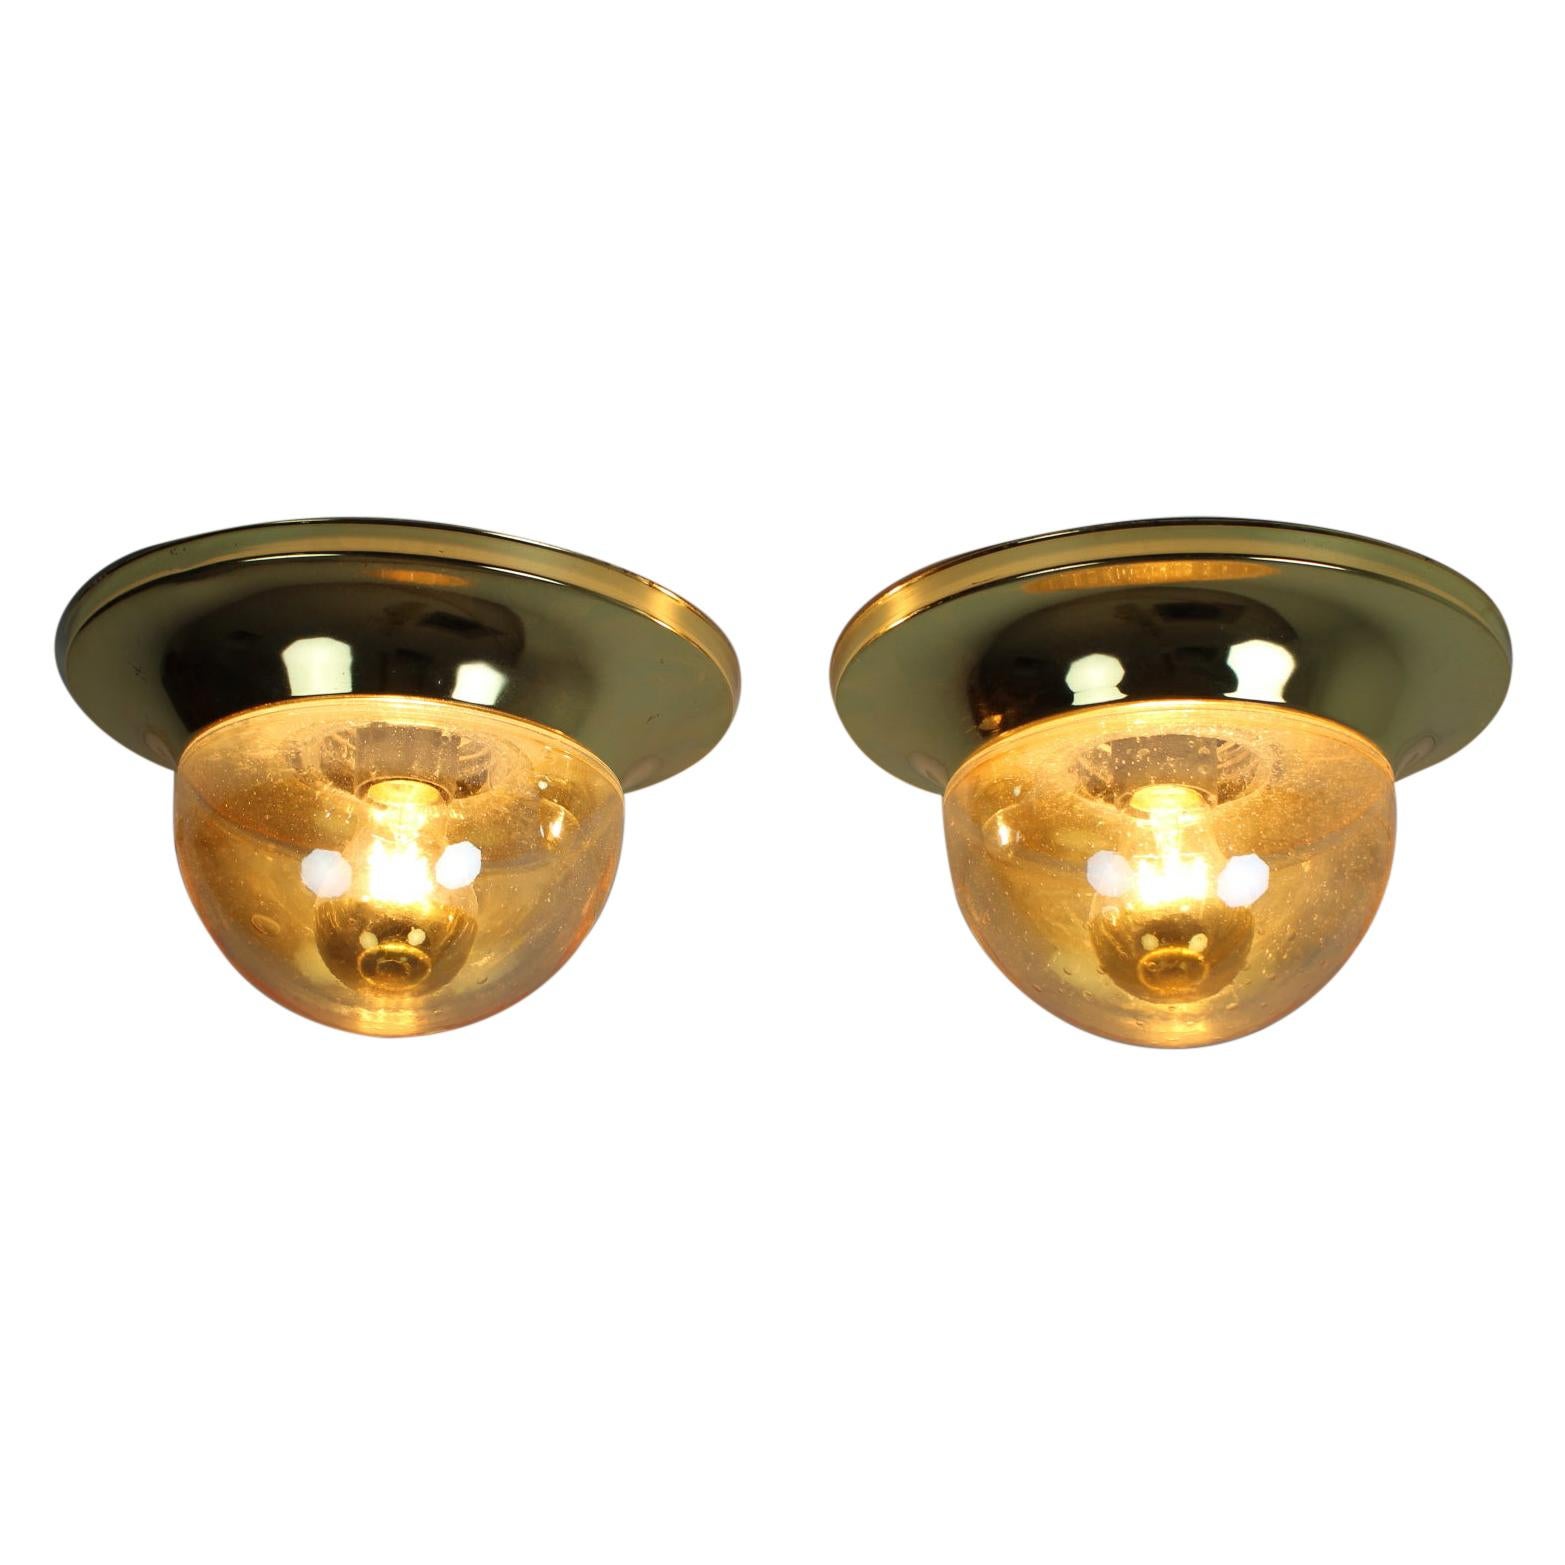 Pair of Brass Austria Wall Lamps, 1950's For Sale